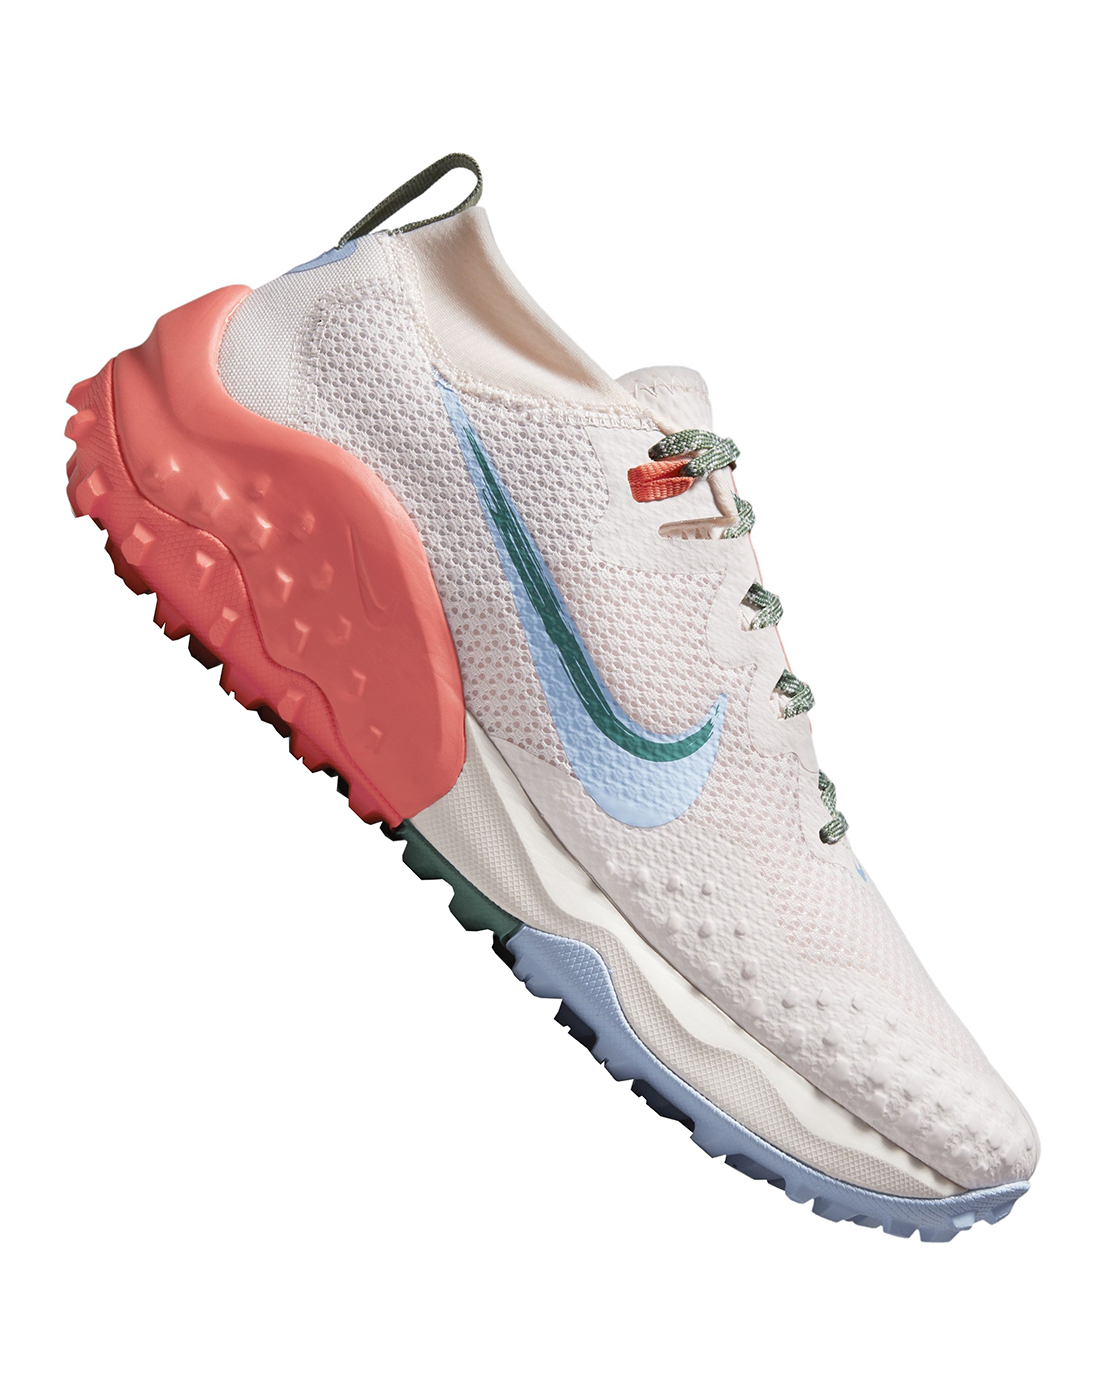 Nike Womens Wildhorse 7 - Pink | Life Style Sports IE